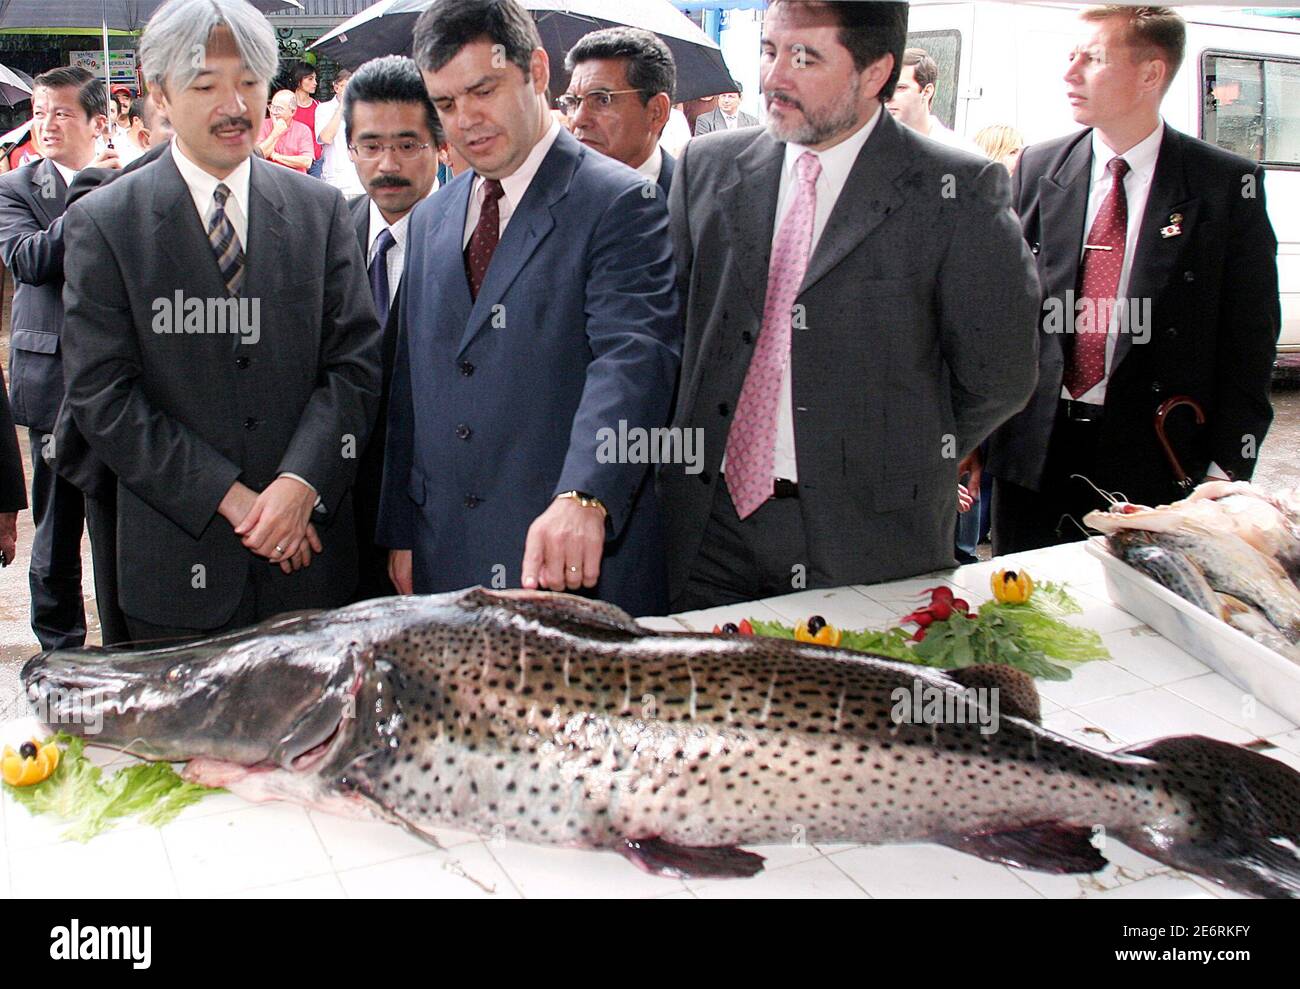 Japan's Prince Akishino (L) observes a giant river catfish known as a  surubi, during a visit with Paraguayan diplomats to the Abasto food market  in Asuncion, on the third day of his